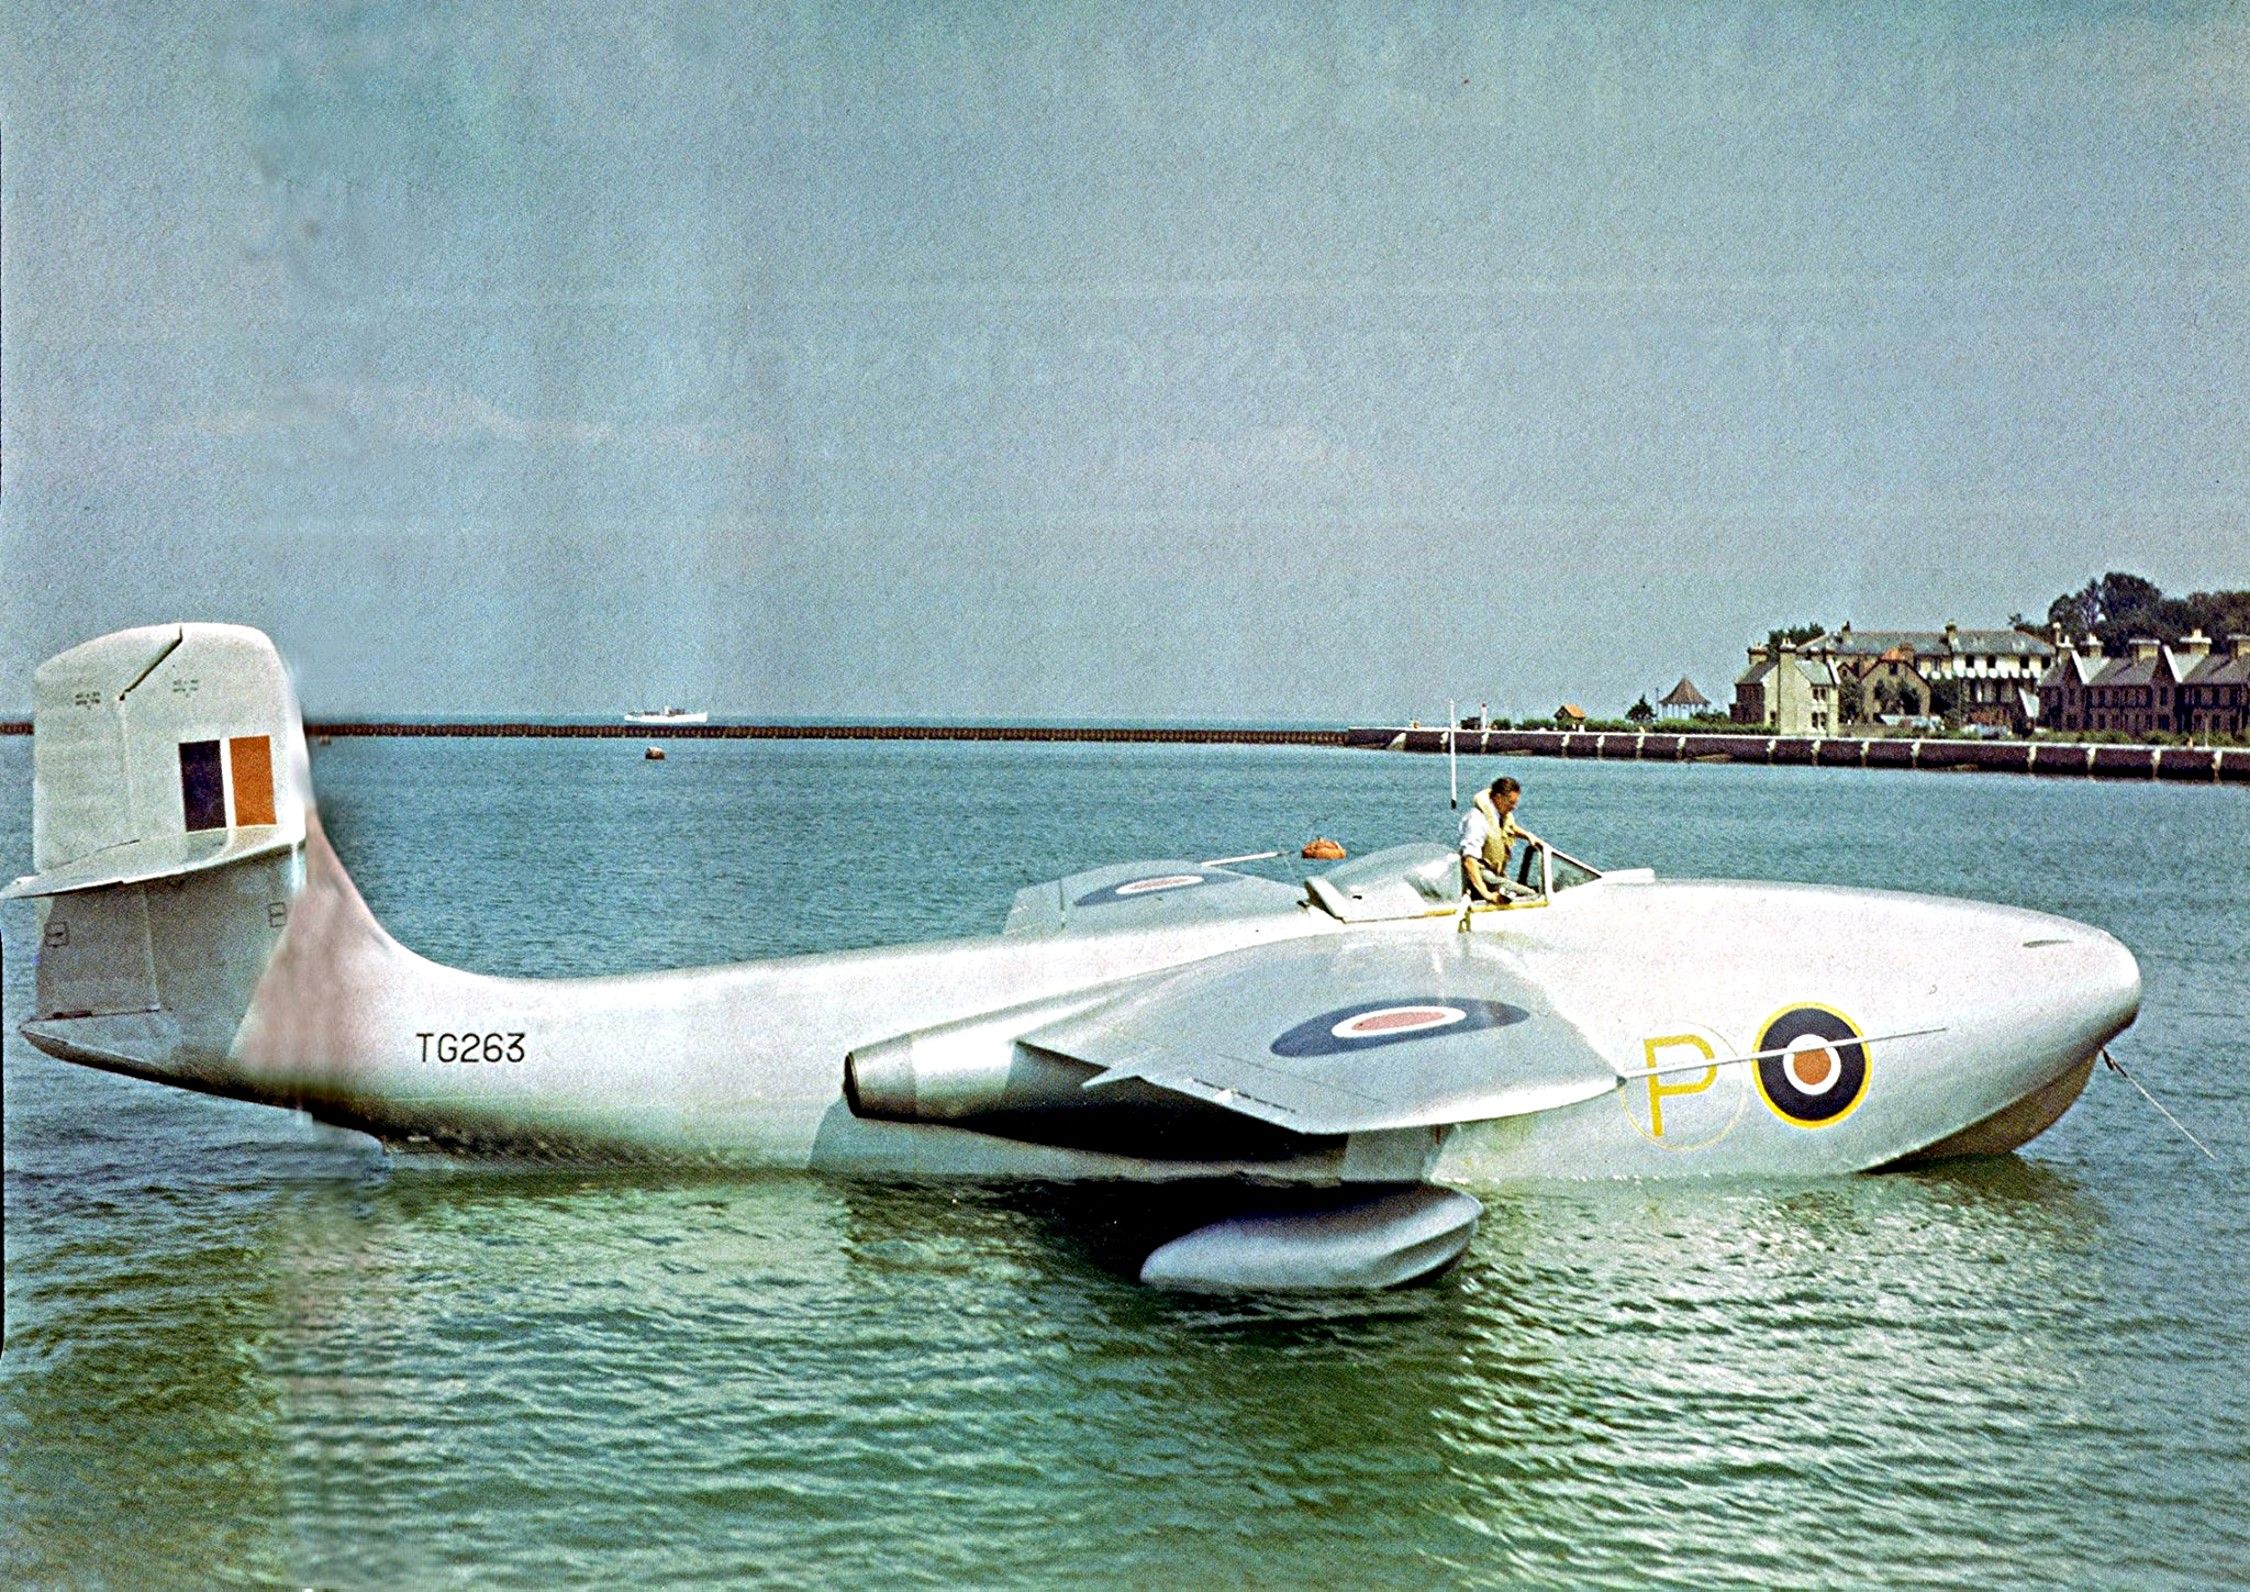 saro-sr-a-1-the-british-flying-boat-jet-fighter-that-even-had-the-us-intrigued_1.jpg